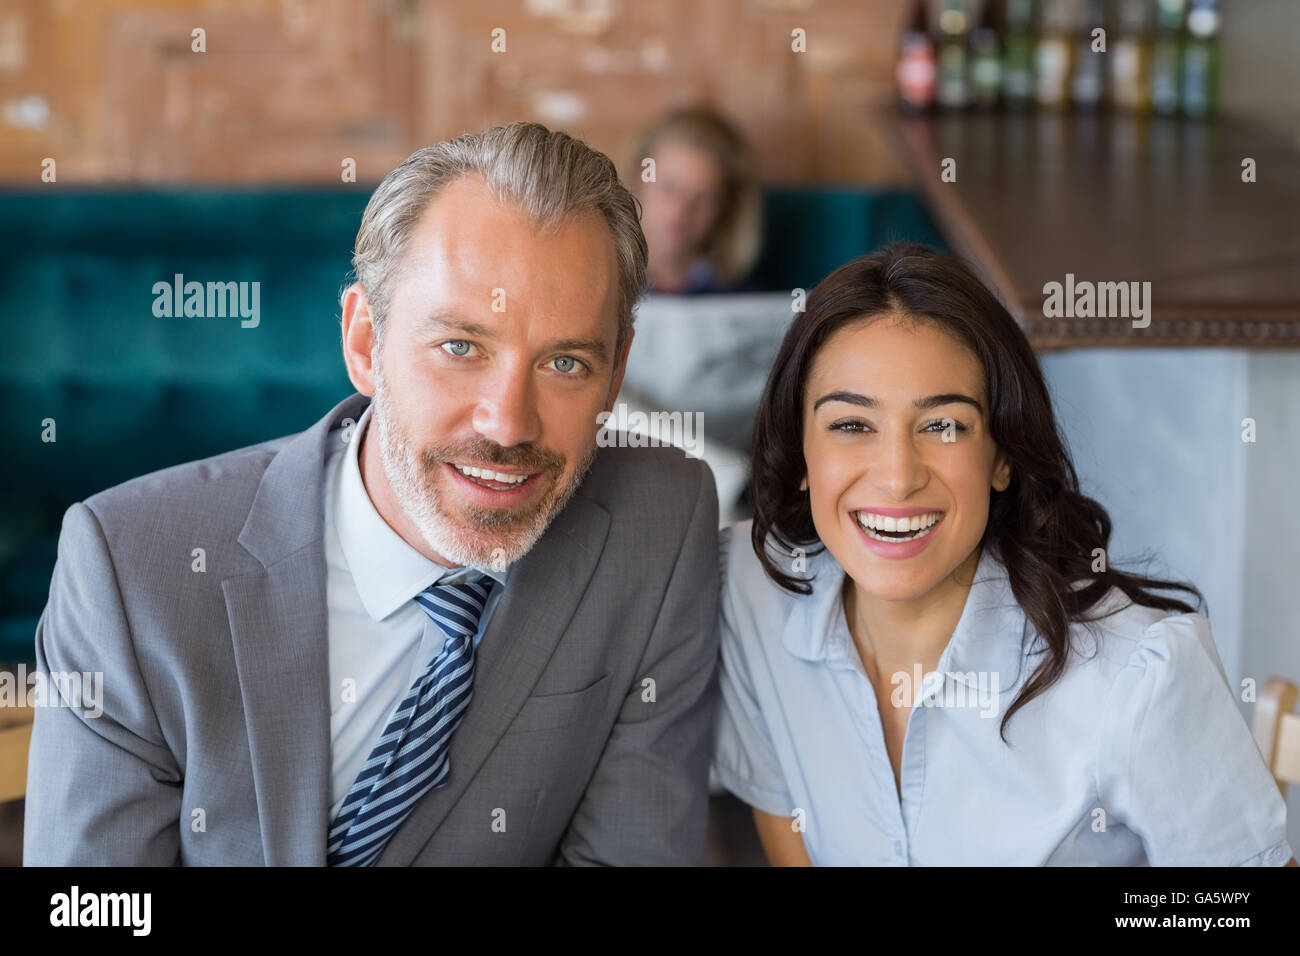 Business colleague smiling in restaurant Stock Photo